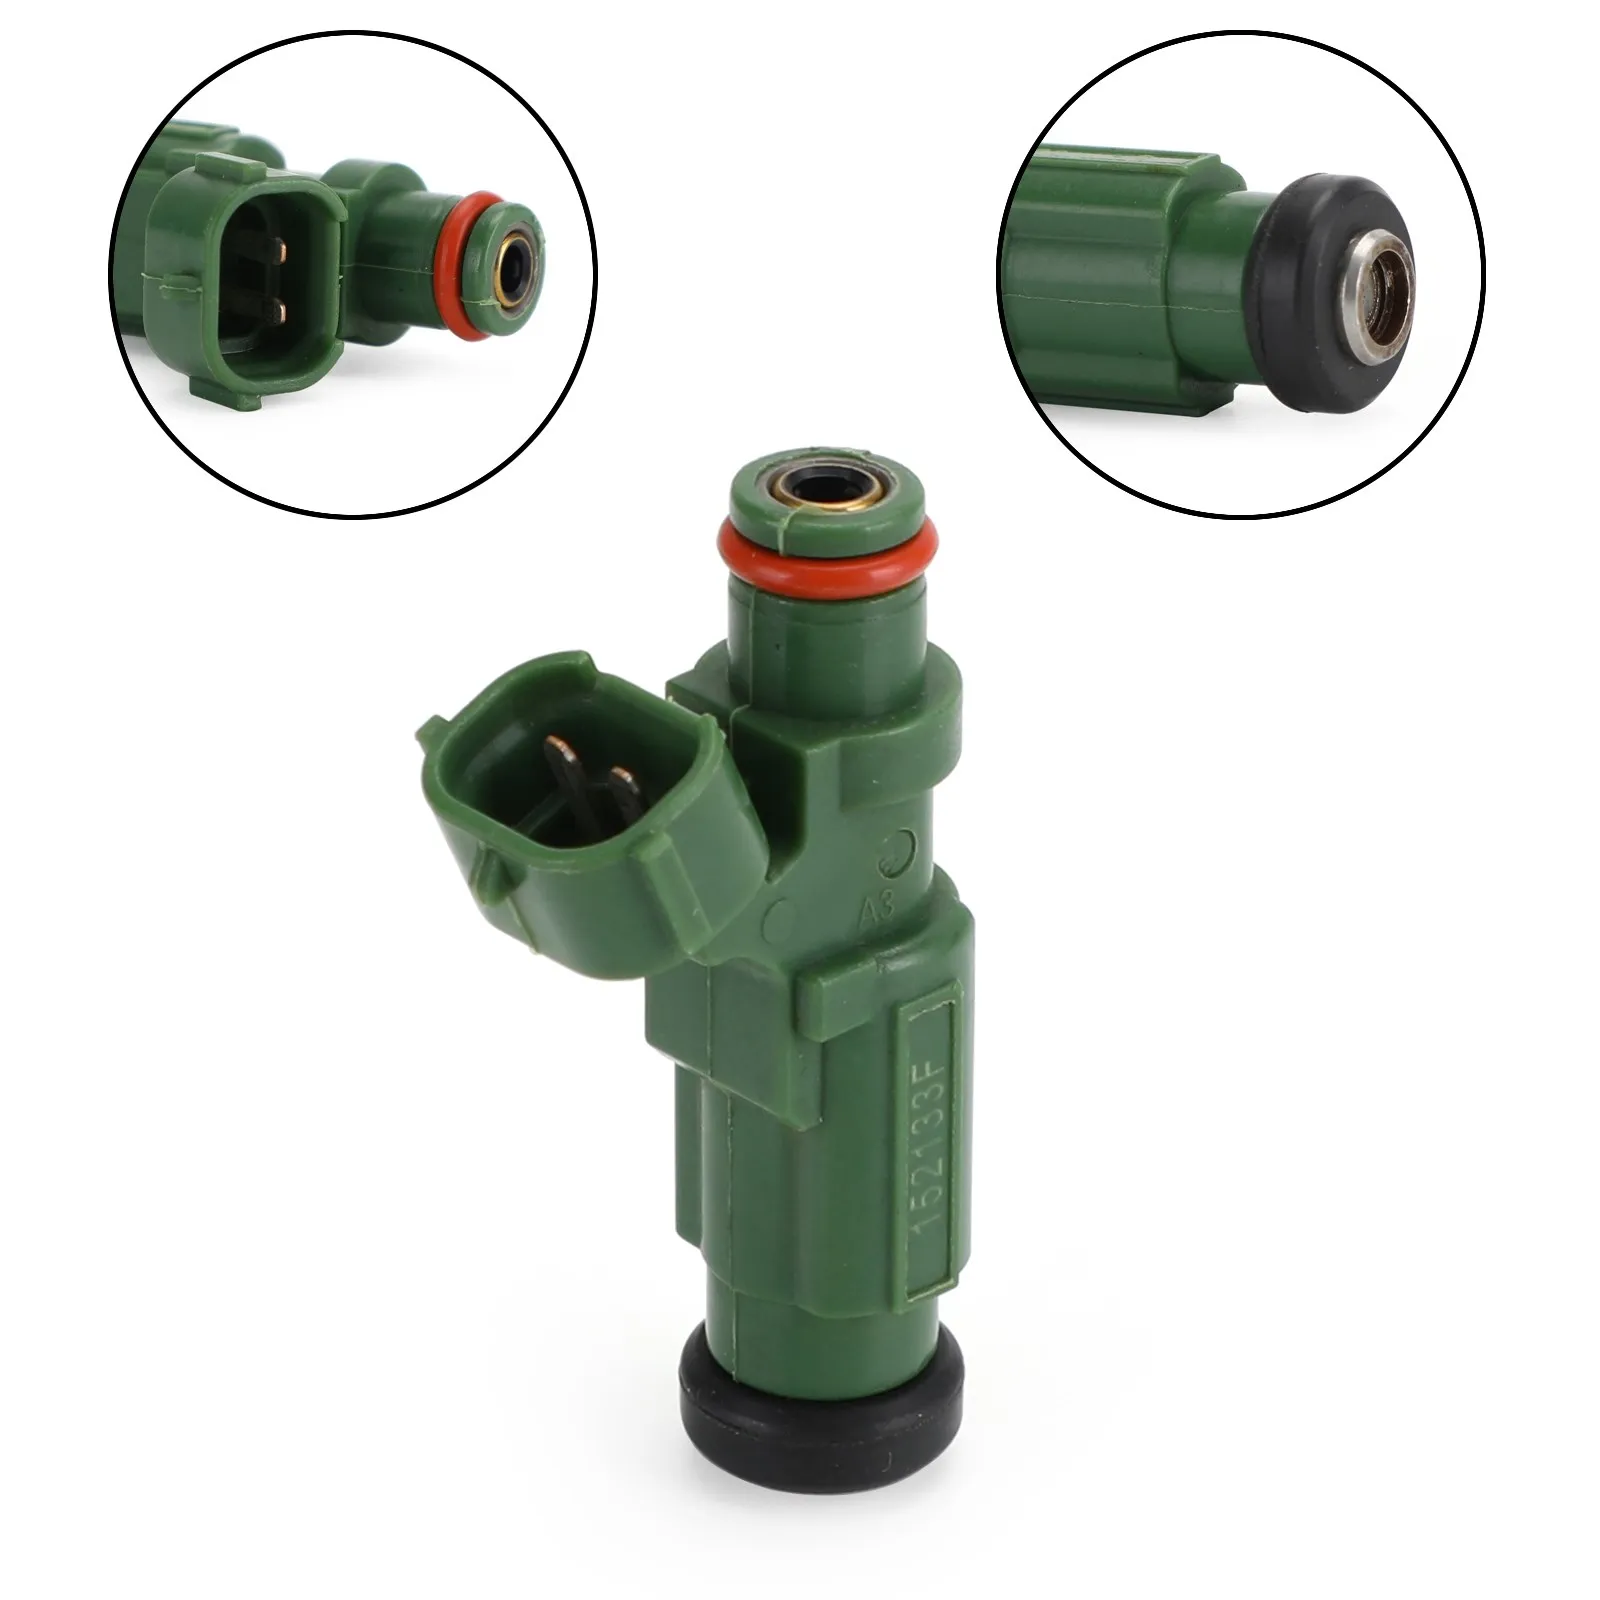 

Artudatech 1pcs Fuel Injector 63P-13761-00-00 Fit For Yamaha F150 Outboard 2004-2013 Car Accessories